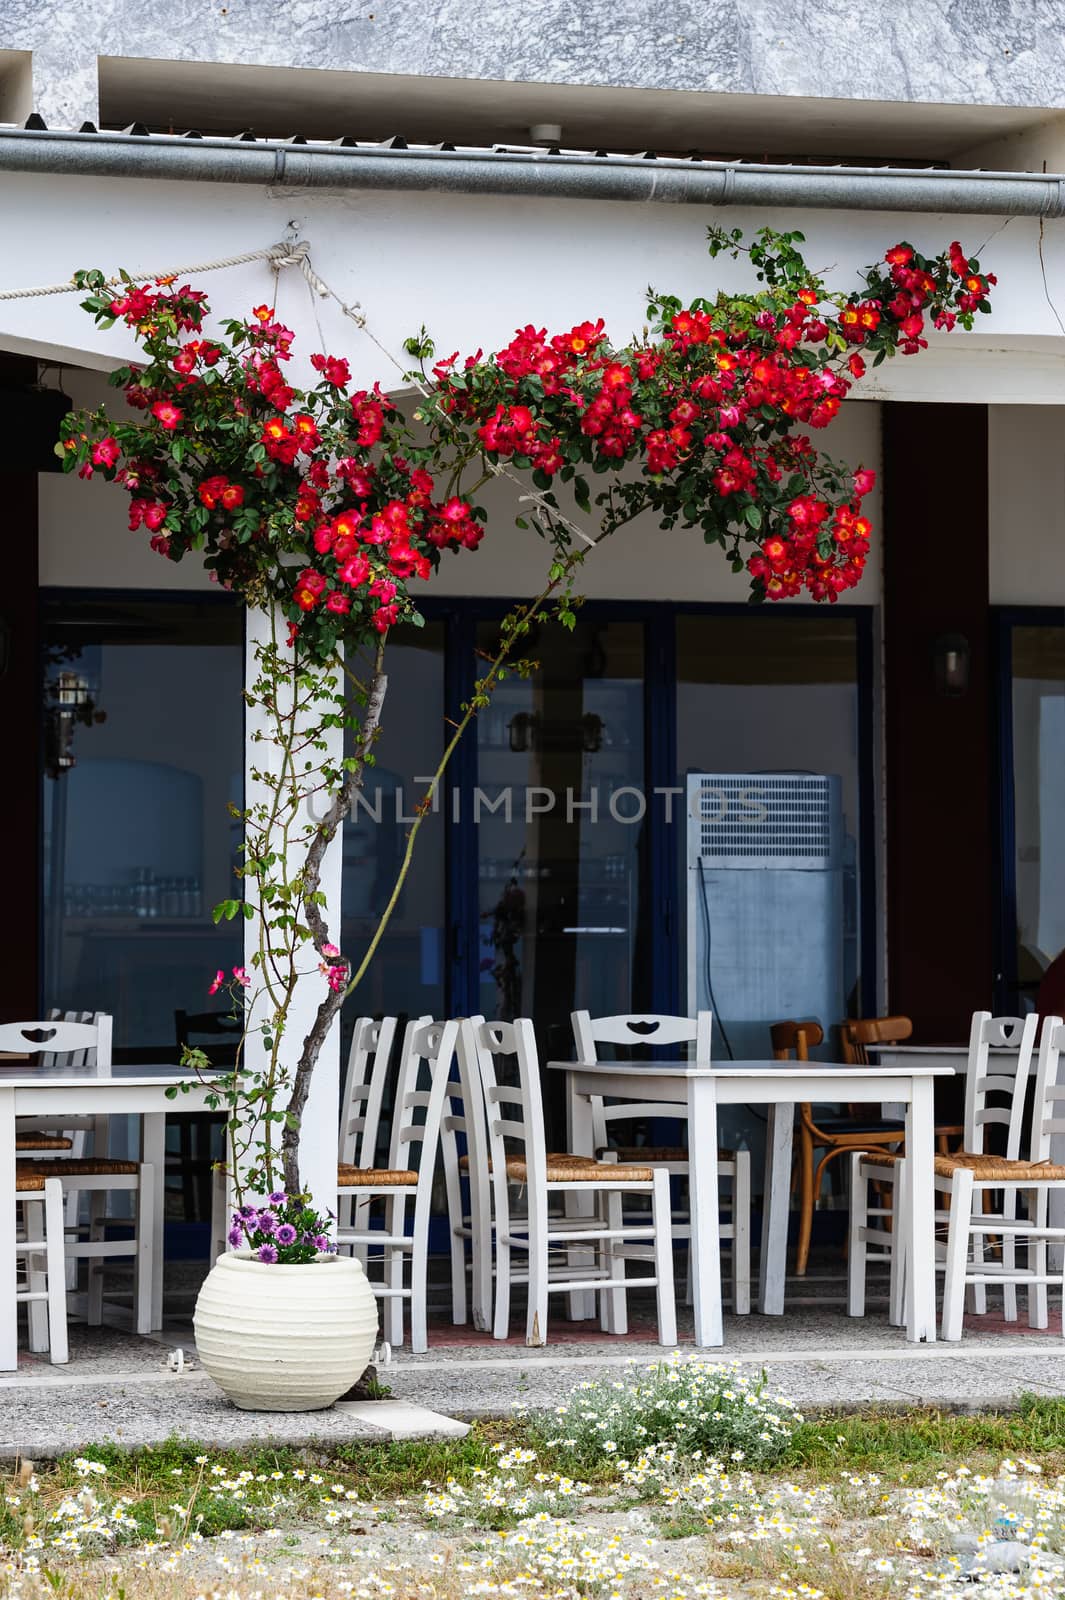 Empty mediterranean outdoor cafe with rosebush on the wall